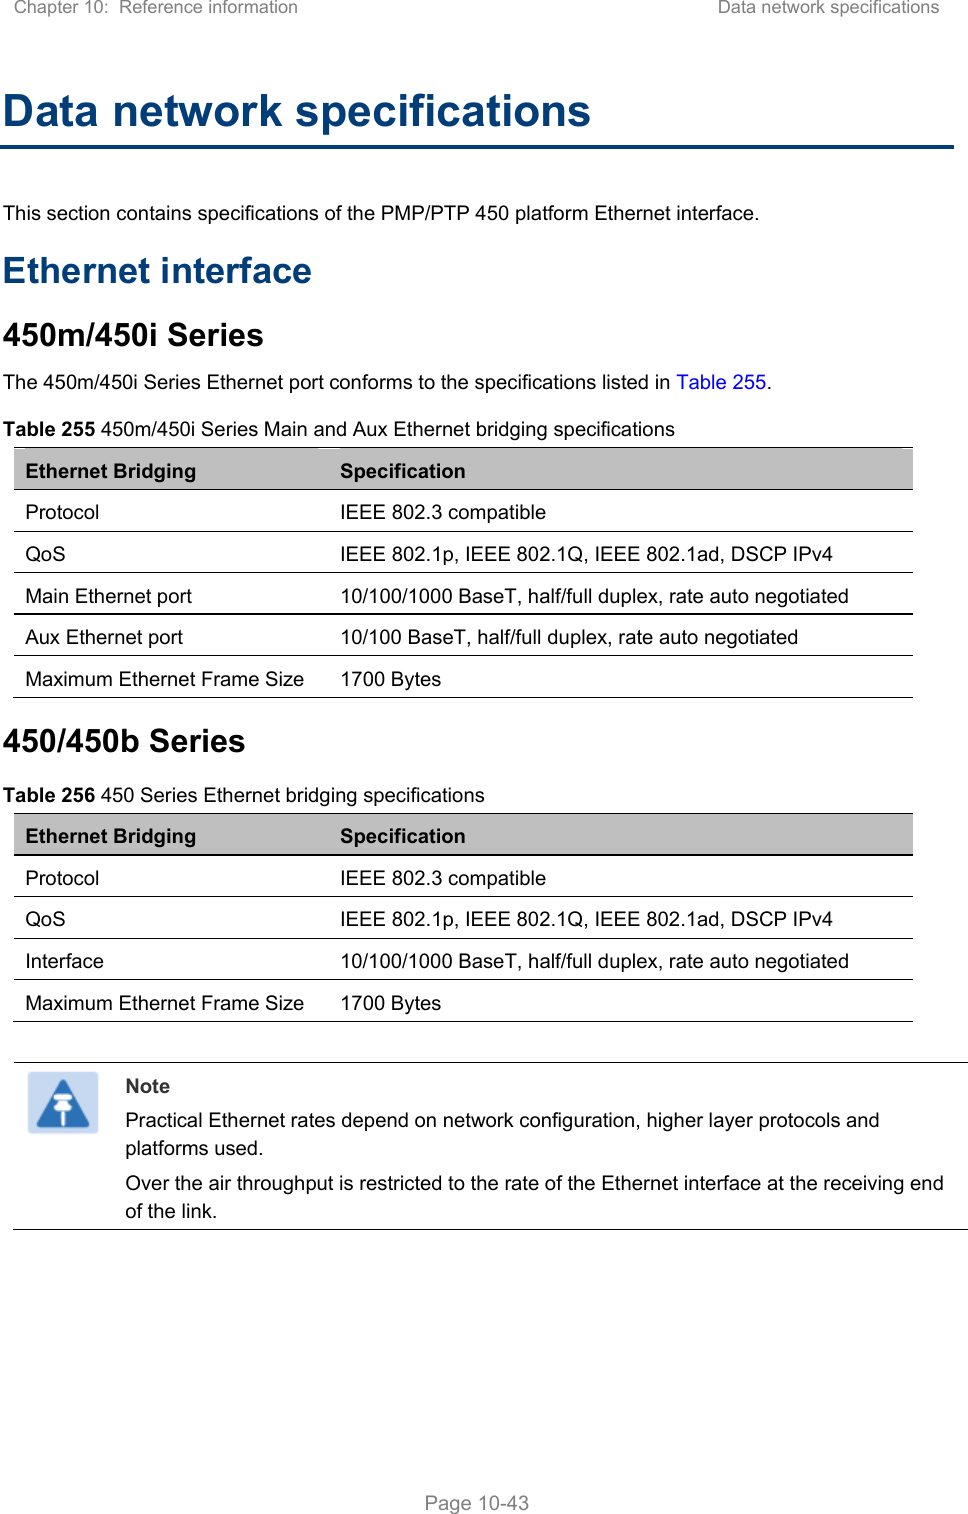 Chapter 10:  Reference information  Data network specifications   Page 10-43 Data network specifications This section contains specifications of the PMP/PTP 450 platform Ethernet interface. Ethernet interface 450m/450i Series  The 450m/450i Series Ethernet port conforms to the specifications listed in Table 255. Table 255 450m/450i Series Main and Aux Ethernet bridging specifications Ethernet Bridging   Specification Protocol   IEEE 802.3 compatible QoS  IEEE 802.1p, IEEE 802.1Q, IEEE 802.1ad, DSCP IPv4 Main Ethernet port  10/100/1000 BaseT, half/full duplex, rate auto negotiated Aux Ethernet port  10/100 BaseT, half/full duplex, rate auto negotiated Maximum Ethernet Frame Size  1700 Bytes 450/450b Series Table 256 450 Series Ethernet bridging specifications Ethernet Bridging   Specification Protocol   IEEE 802.3 compatible QoS  IEEE 802.1p, IEEE 802.1Q, IEEE 802.1ad, DSCP IPv4 Interface   10/100/1000 BaseT, half/full duplex, rate auto negotiated Maximum Ethernet Frame Size  1700 Bytes   Note Practical Ethernet rates depend on network configuration, higher layer protocols and platforms used. Over the air throughput is restricted to the rate of the Ethernet interface at the receiving end of the link.    